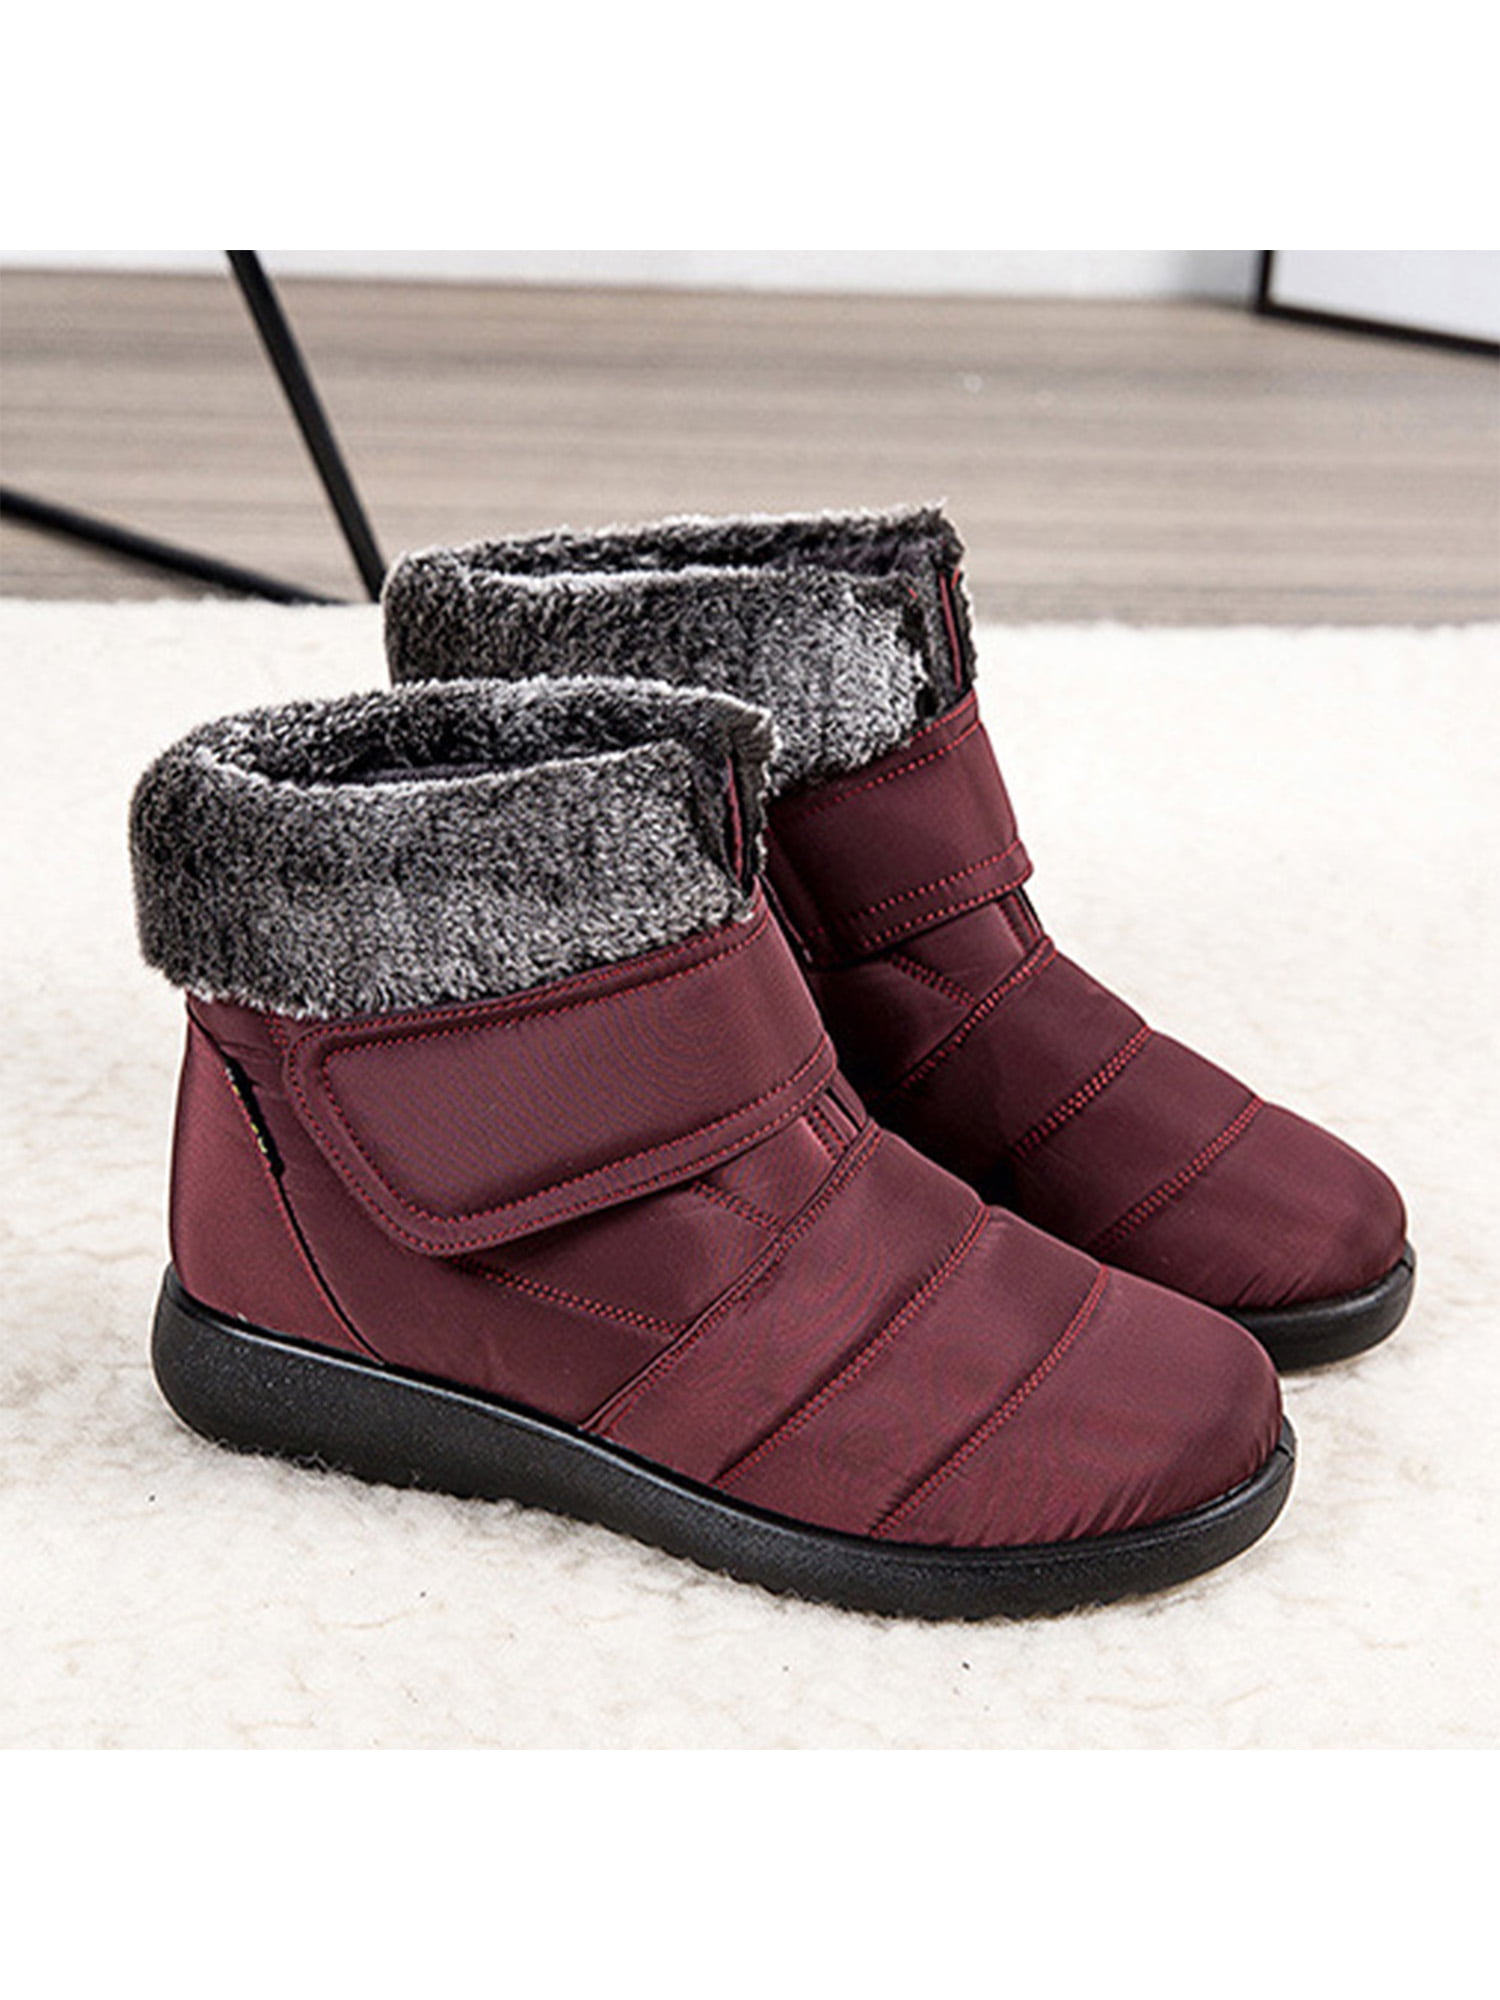 Details about   Womens Suede Snow Ankle Boots Fur Lining Shoes Casual Winter Warm Round Toe Chic